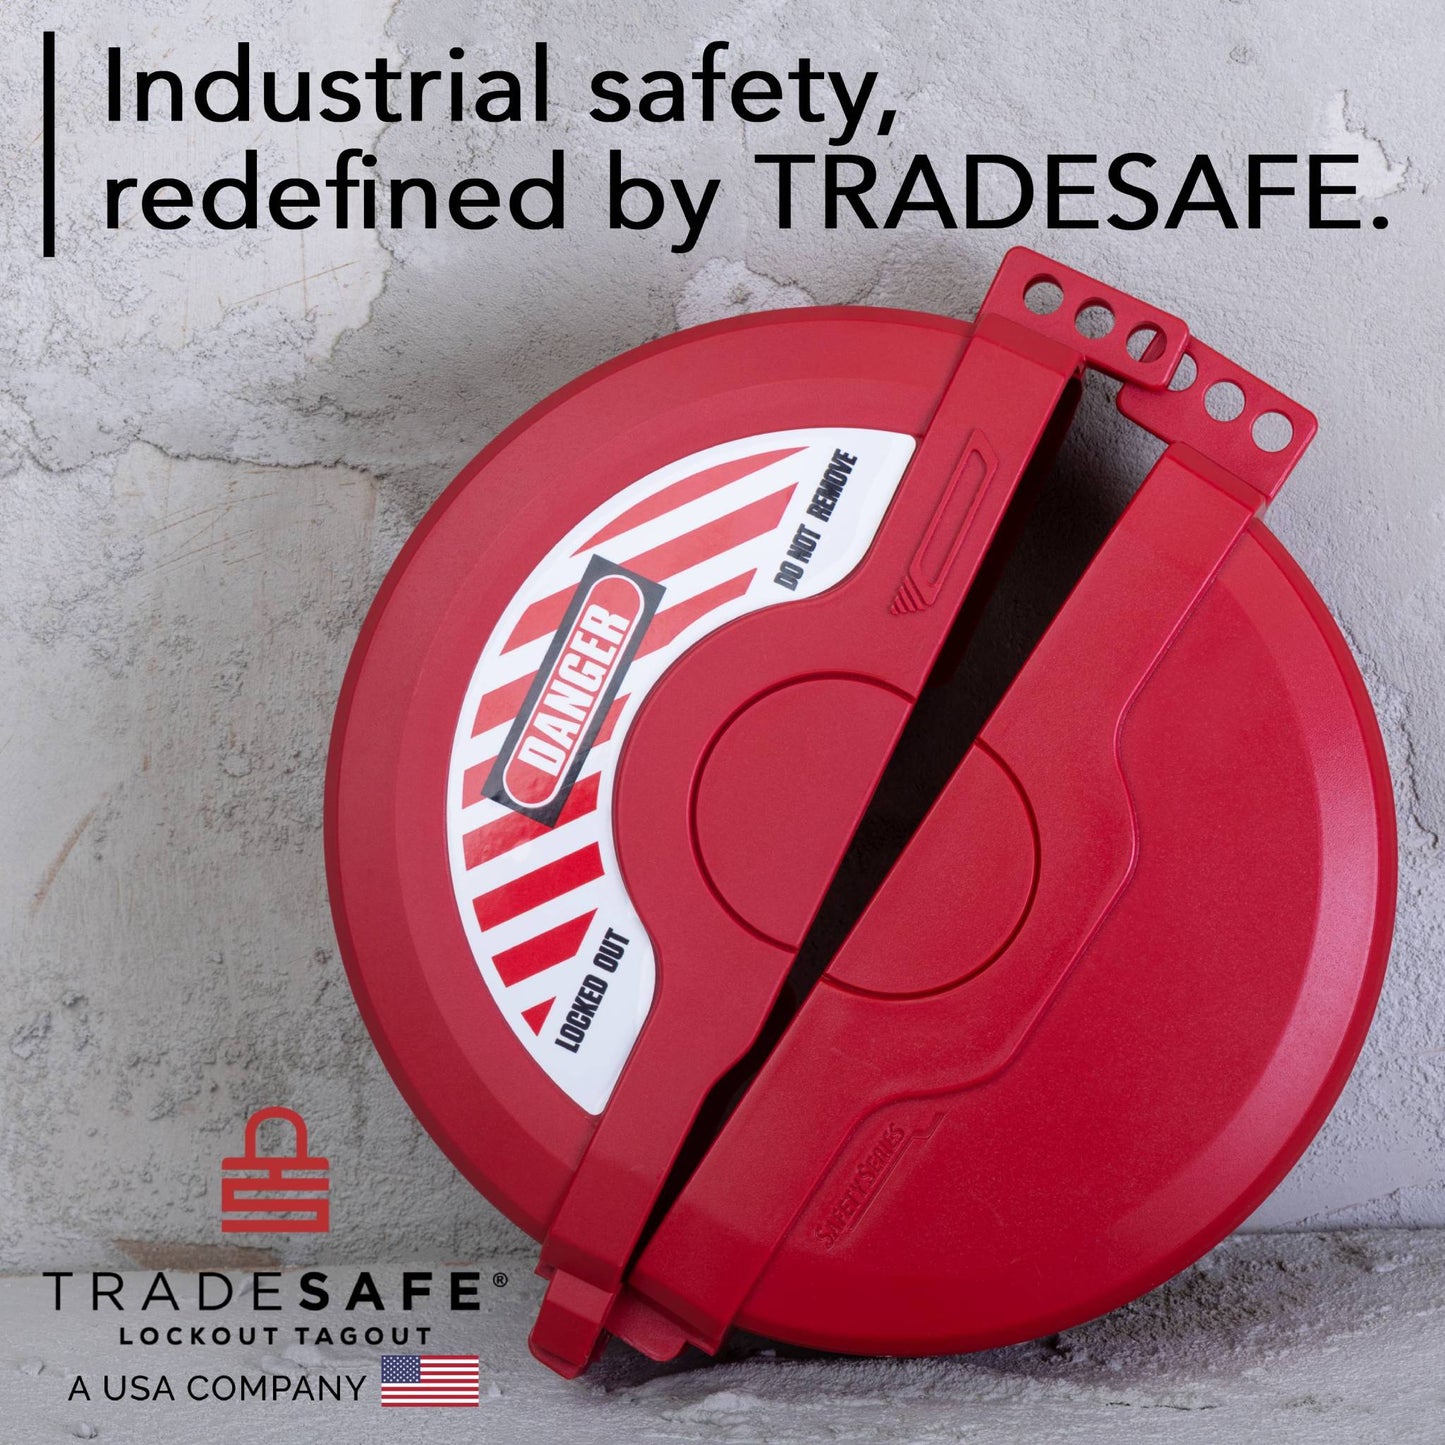 lockout tagout branding image; industrial safety, redefined by tradesafe